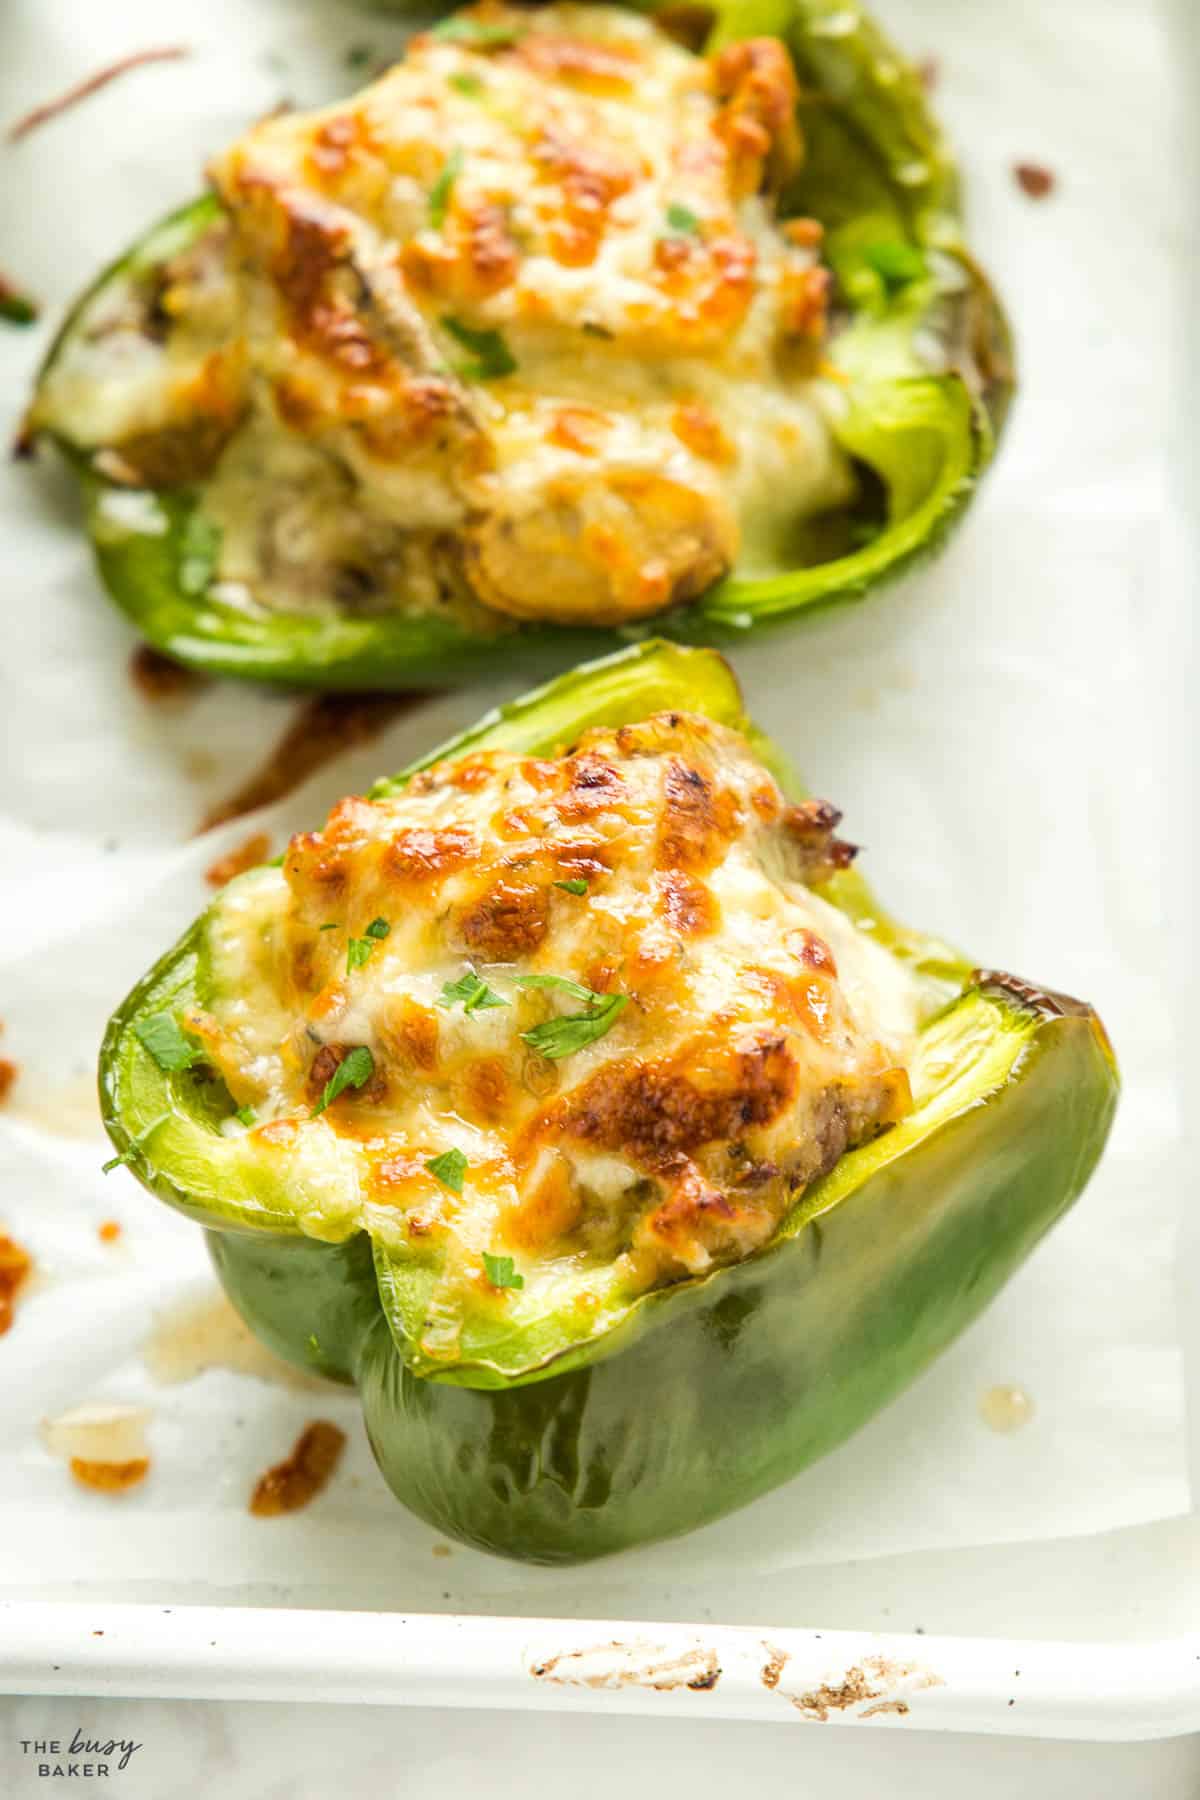 closeup image: green pepper with steak and cheese filling